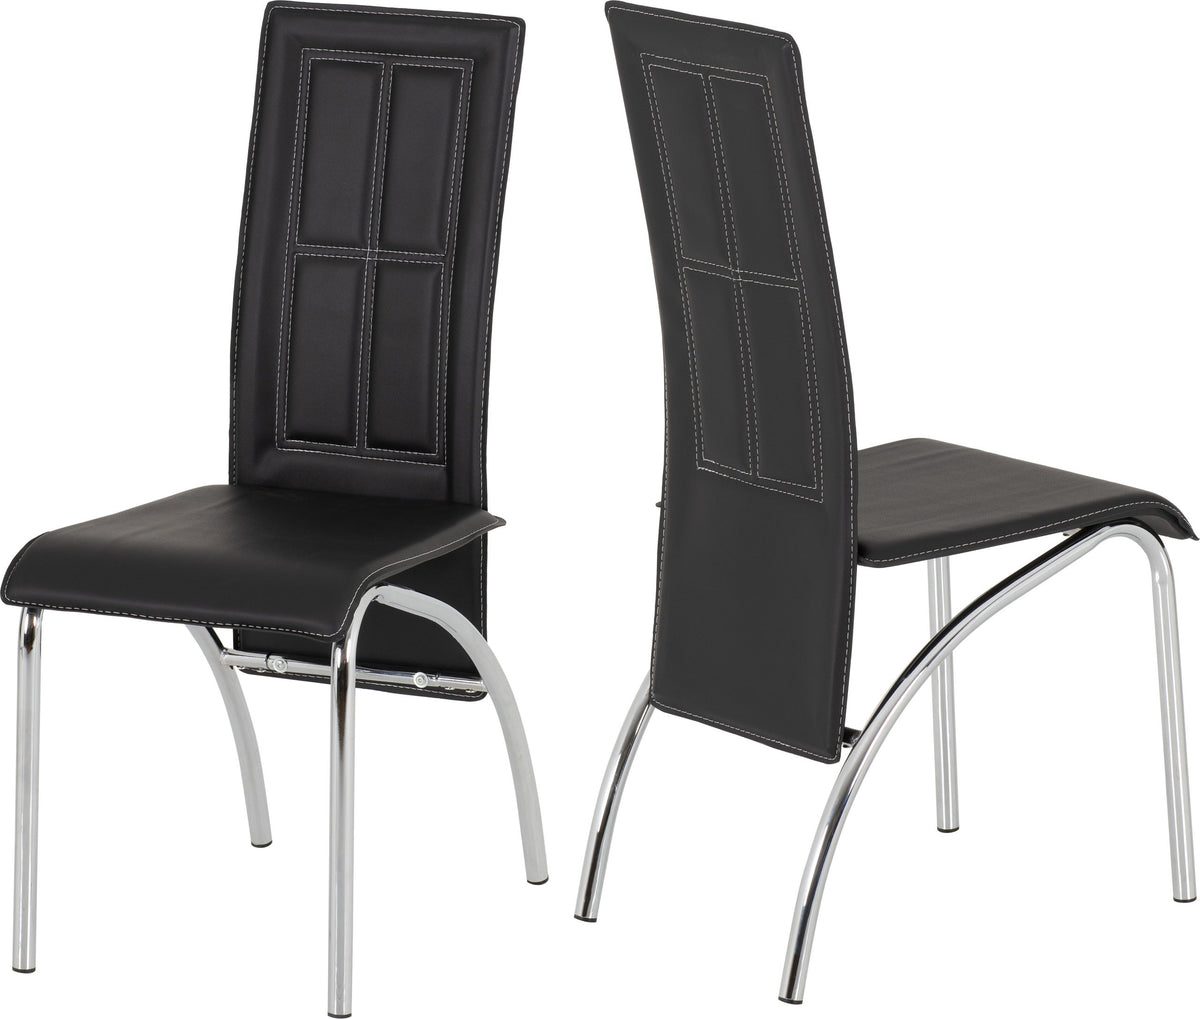 A3 Dining Chair in Black ( Price For 2 Chairs )